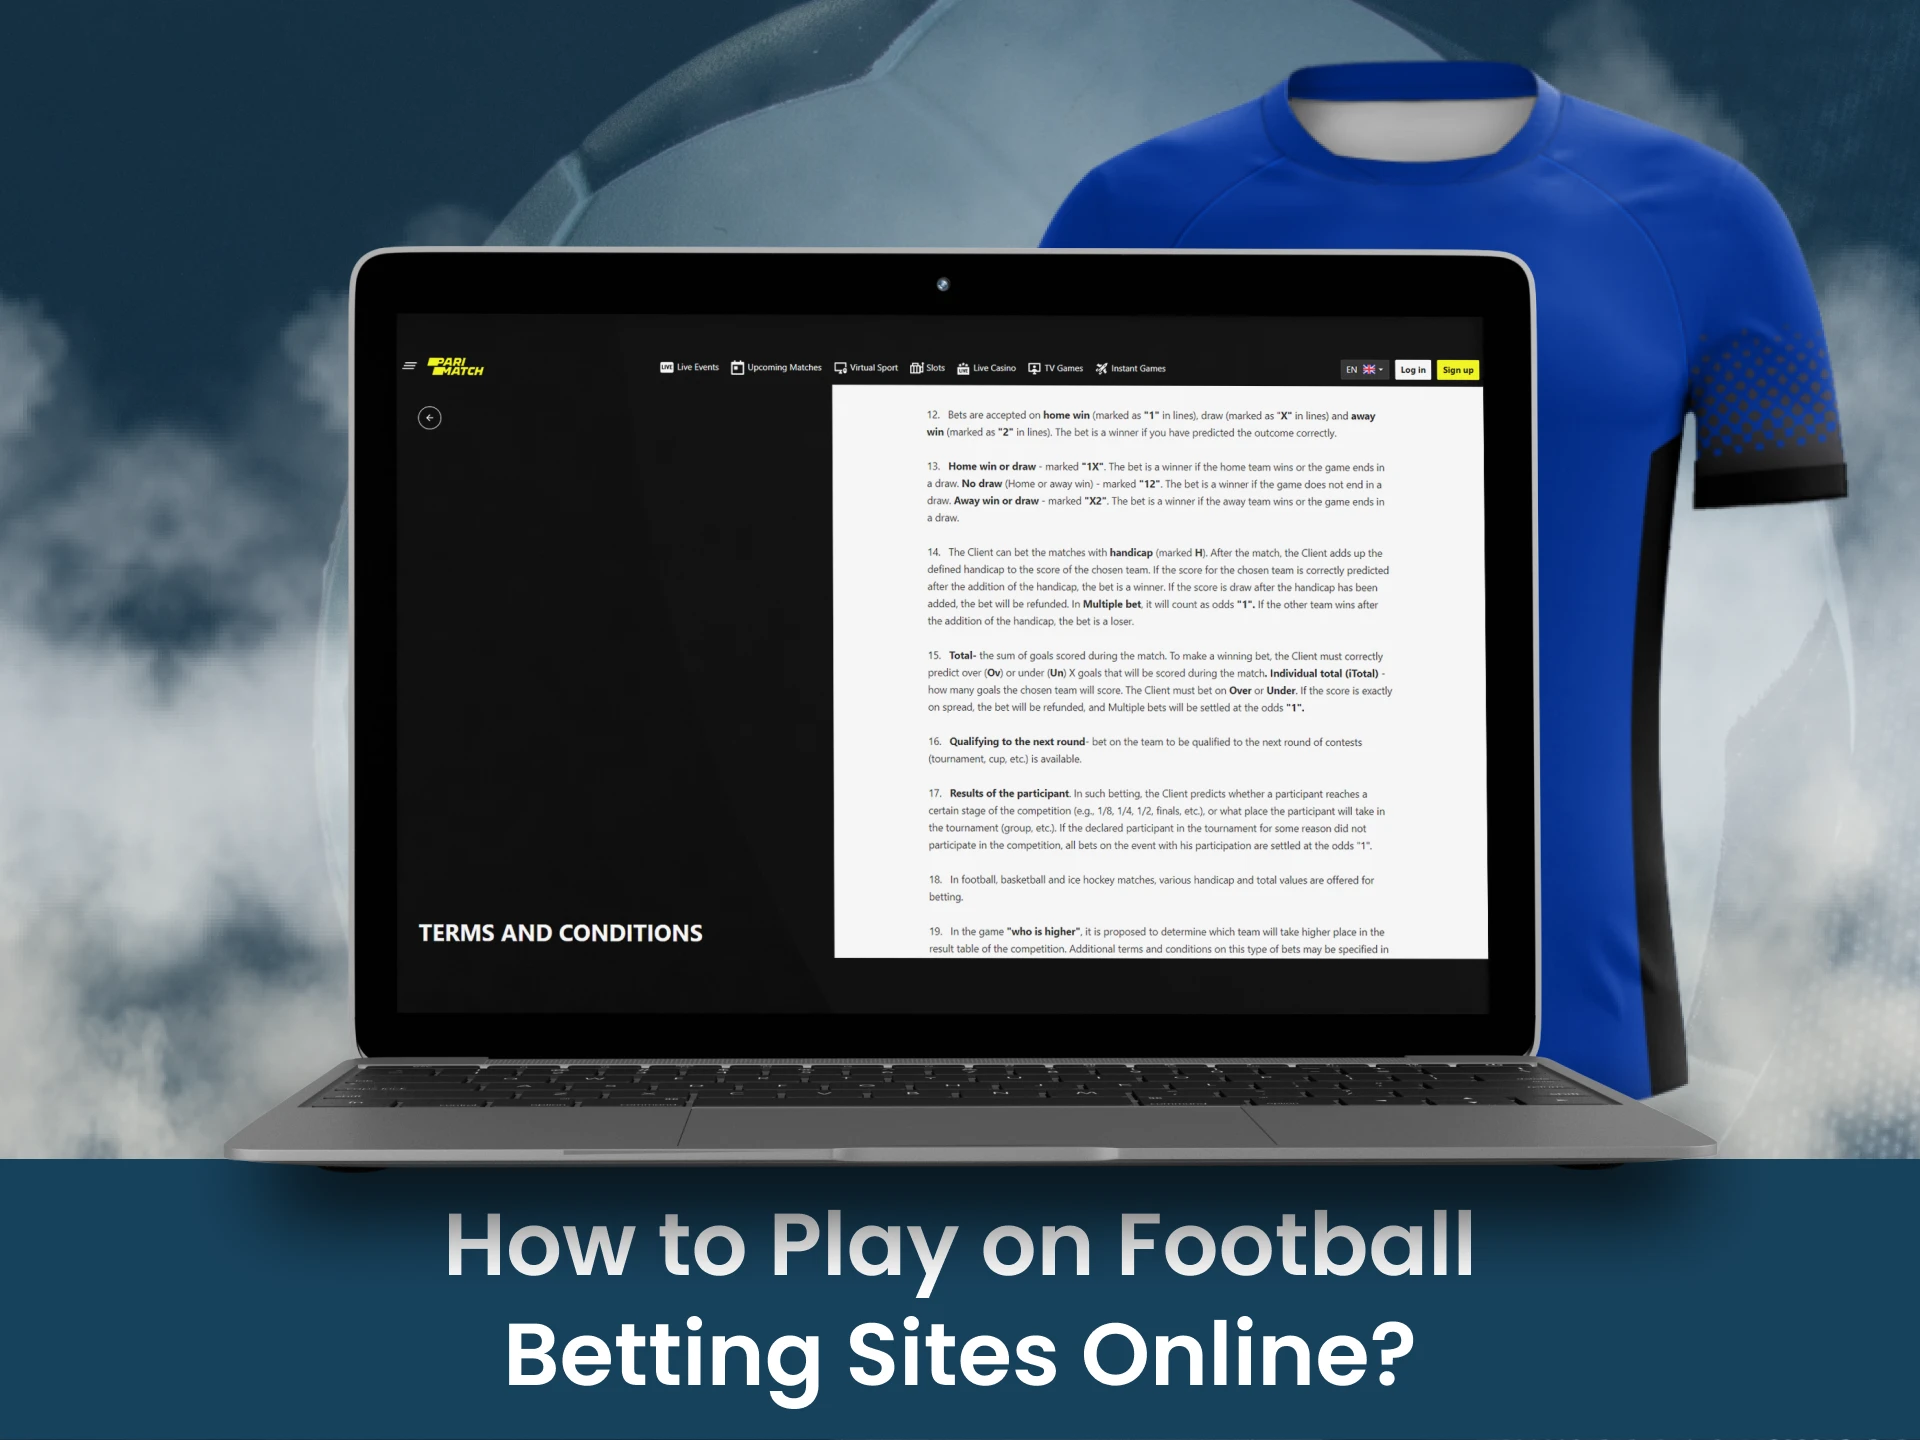 There are a few steps to start betting online.